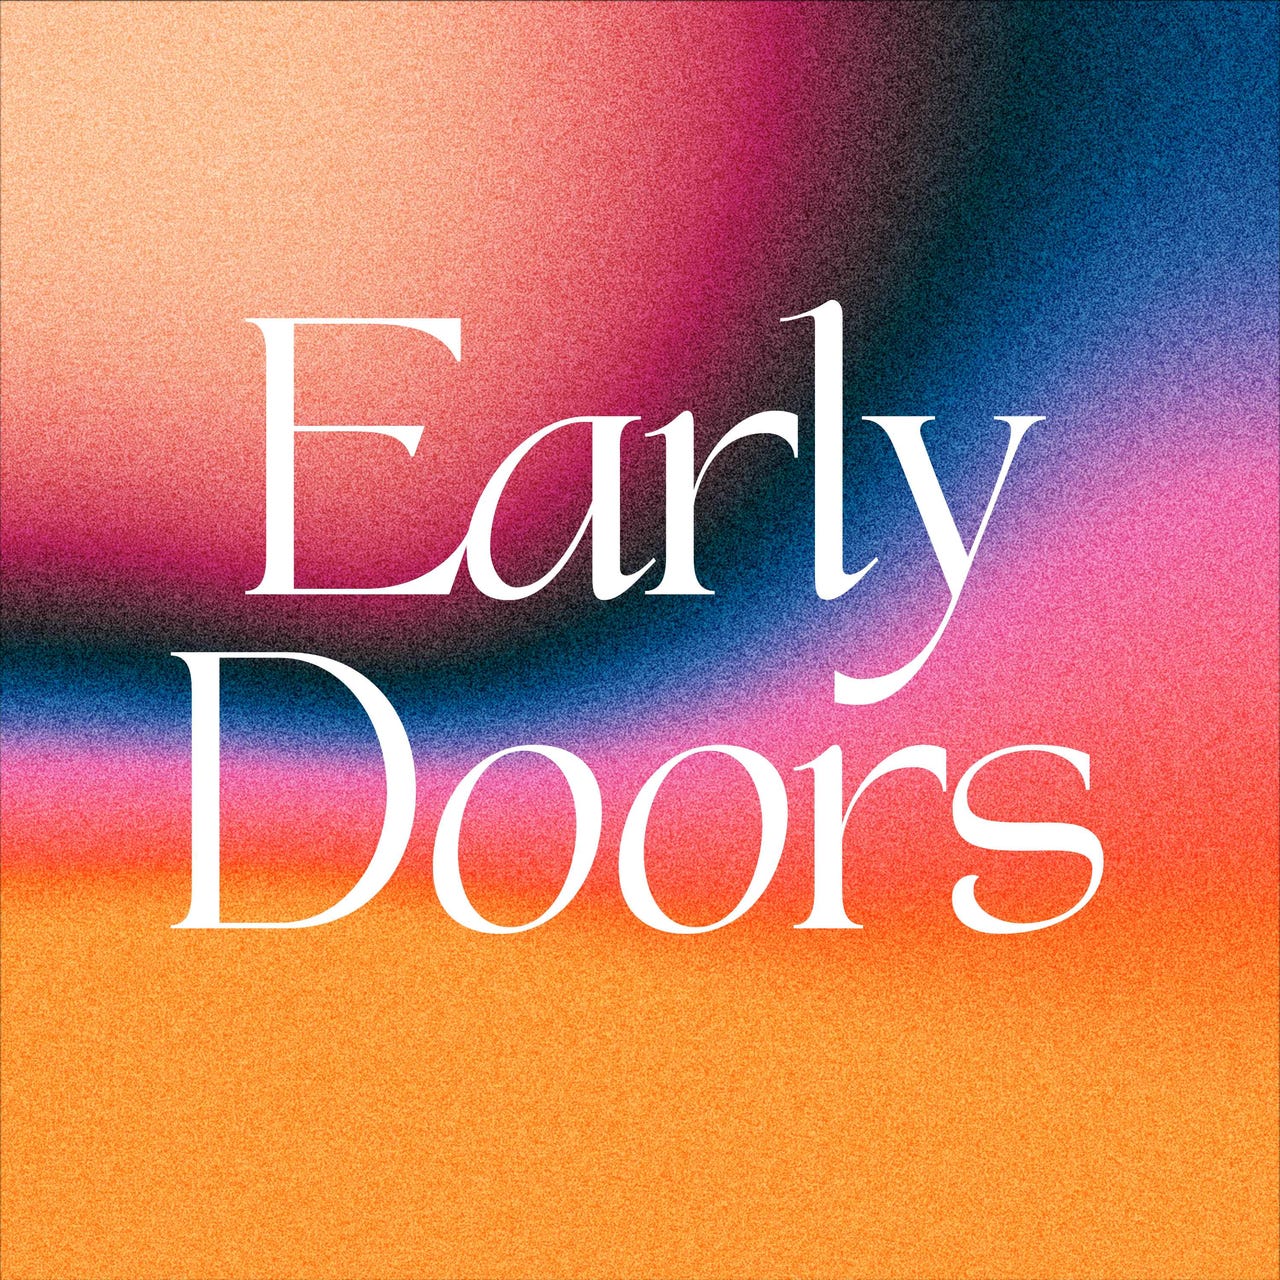 Artwork for Early doors